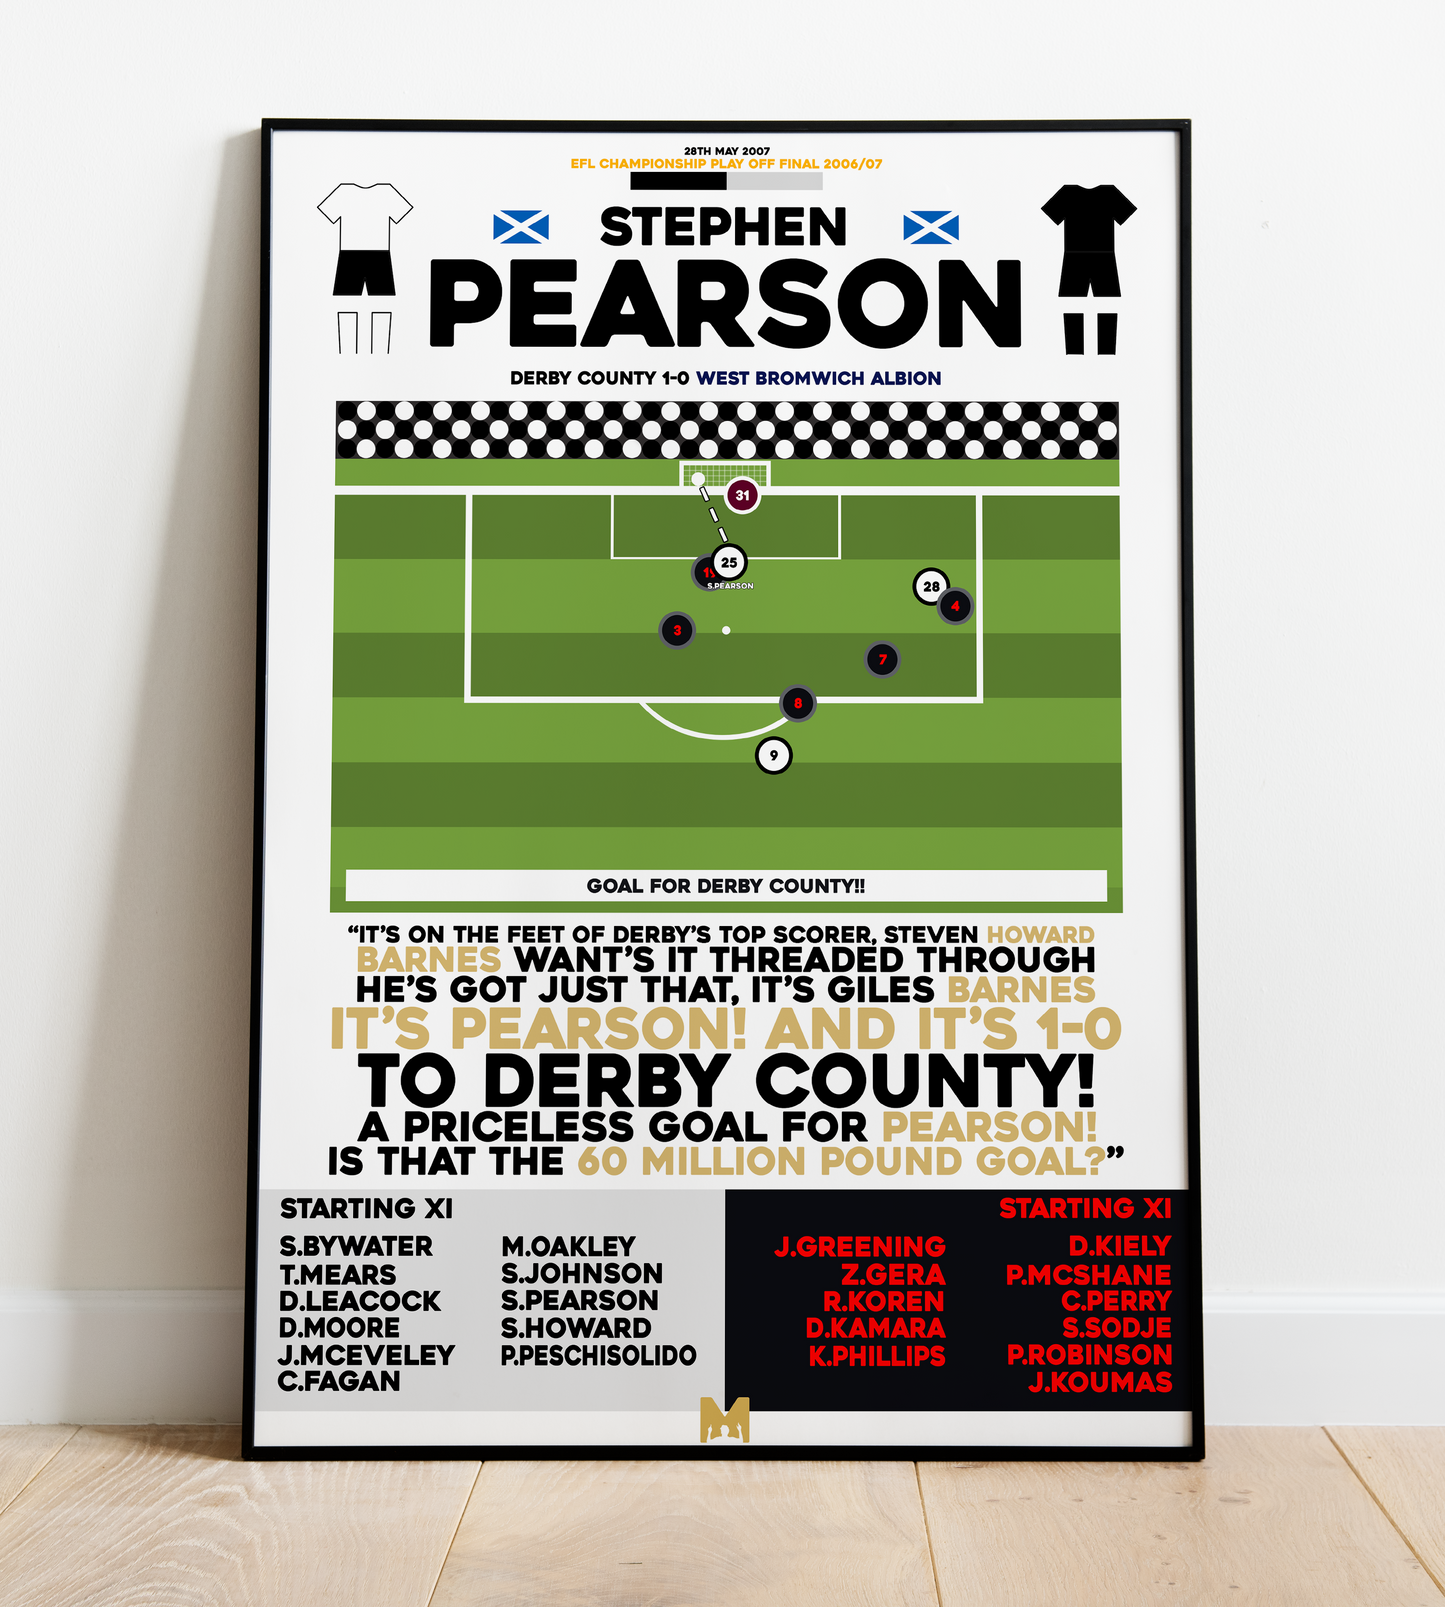 Stephen Pearson Goal vs West Bromwich Albion - EFL Championship Play-Off Final 2006/07 - Derby County